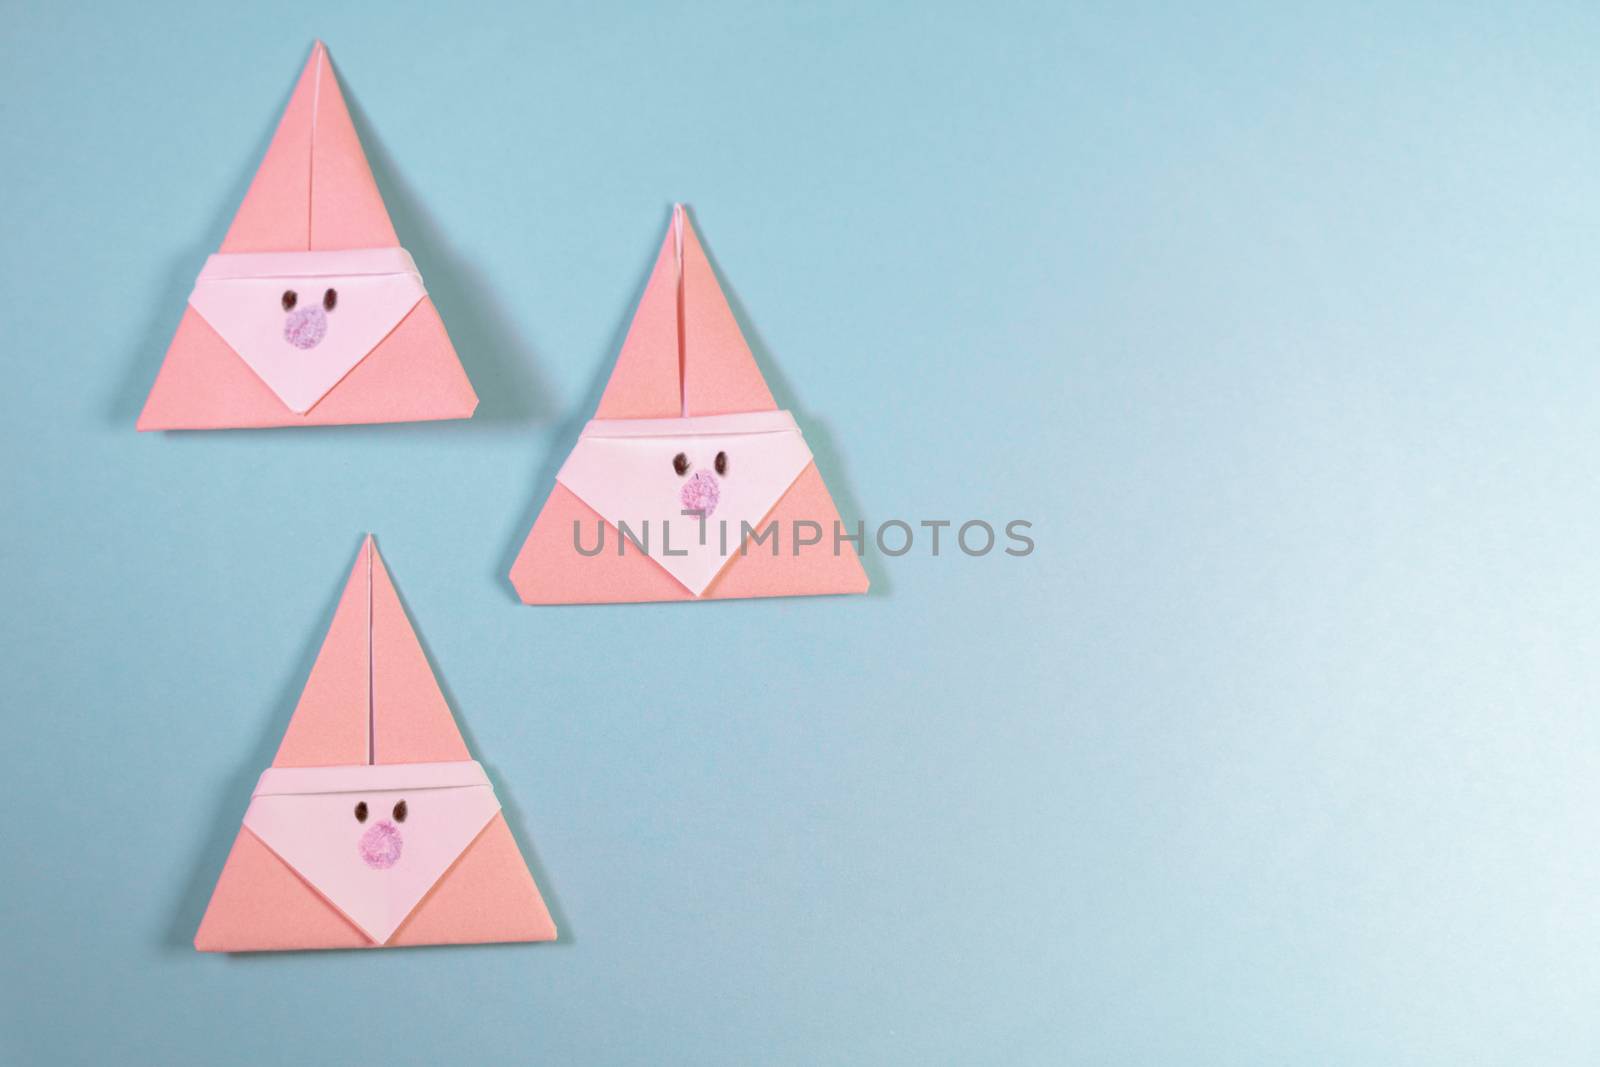 Three Origami Xmas Santa claus on a blue background by tanaonte